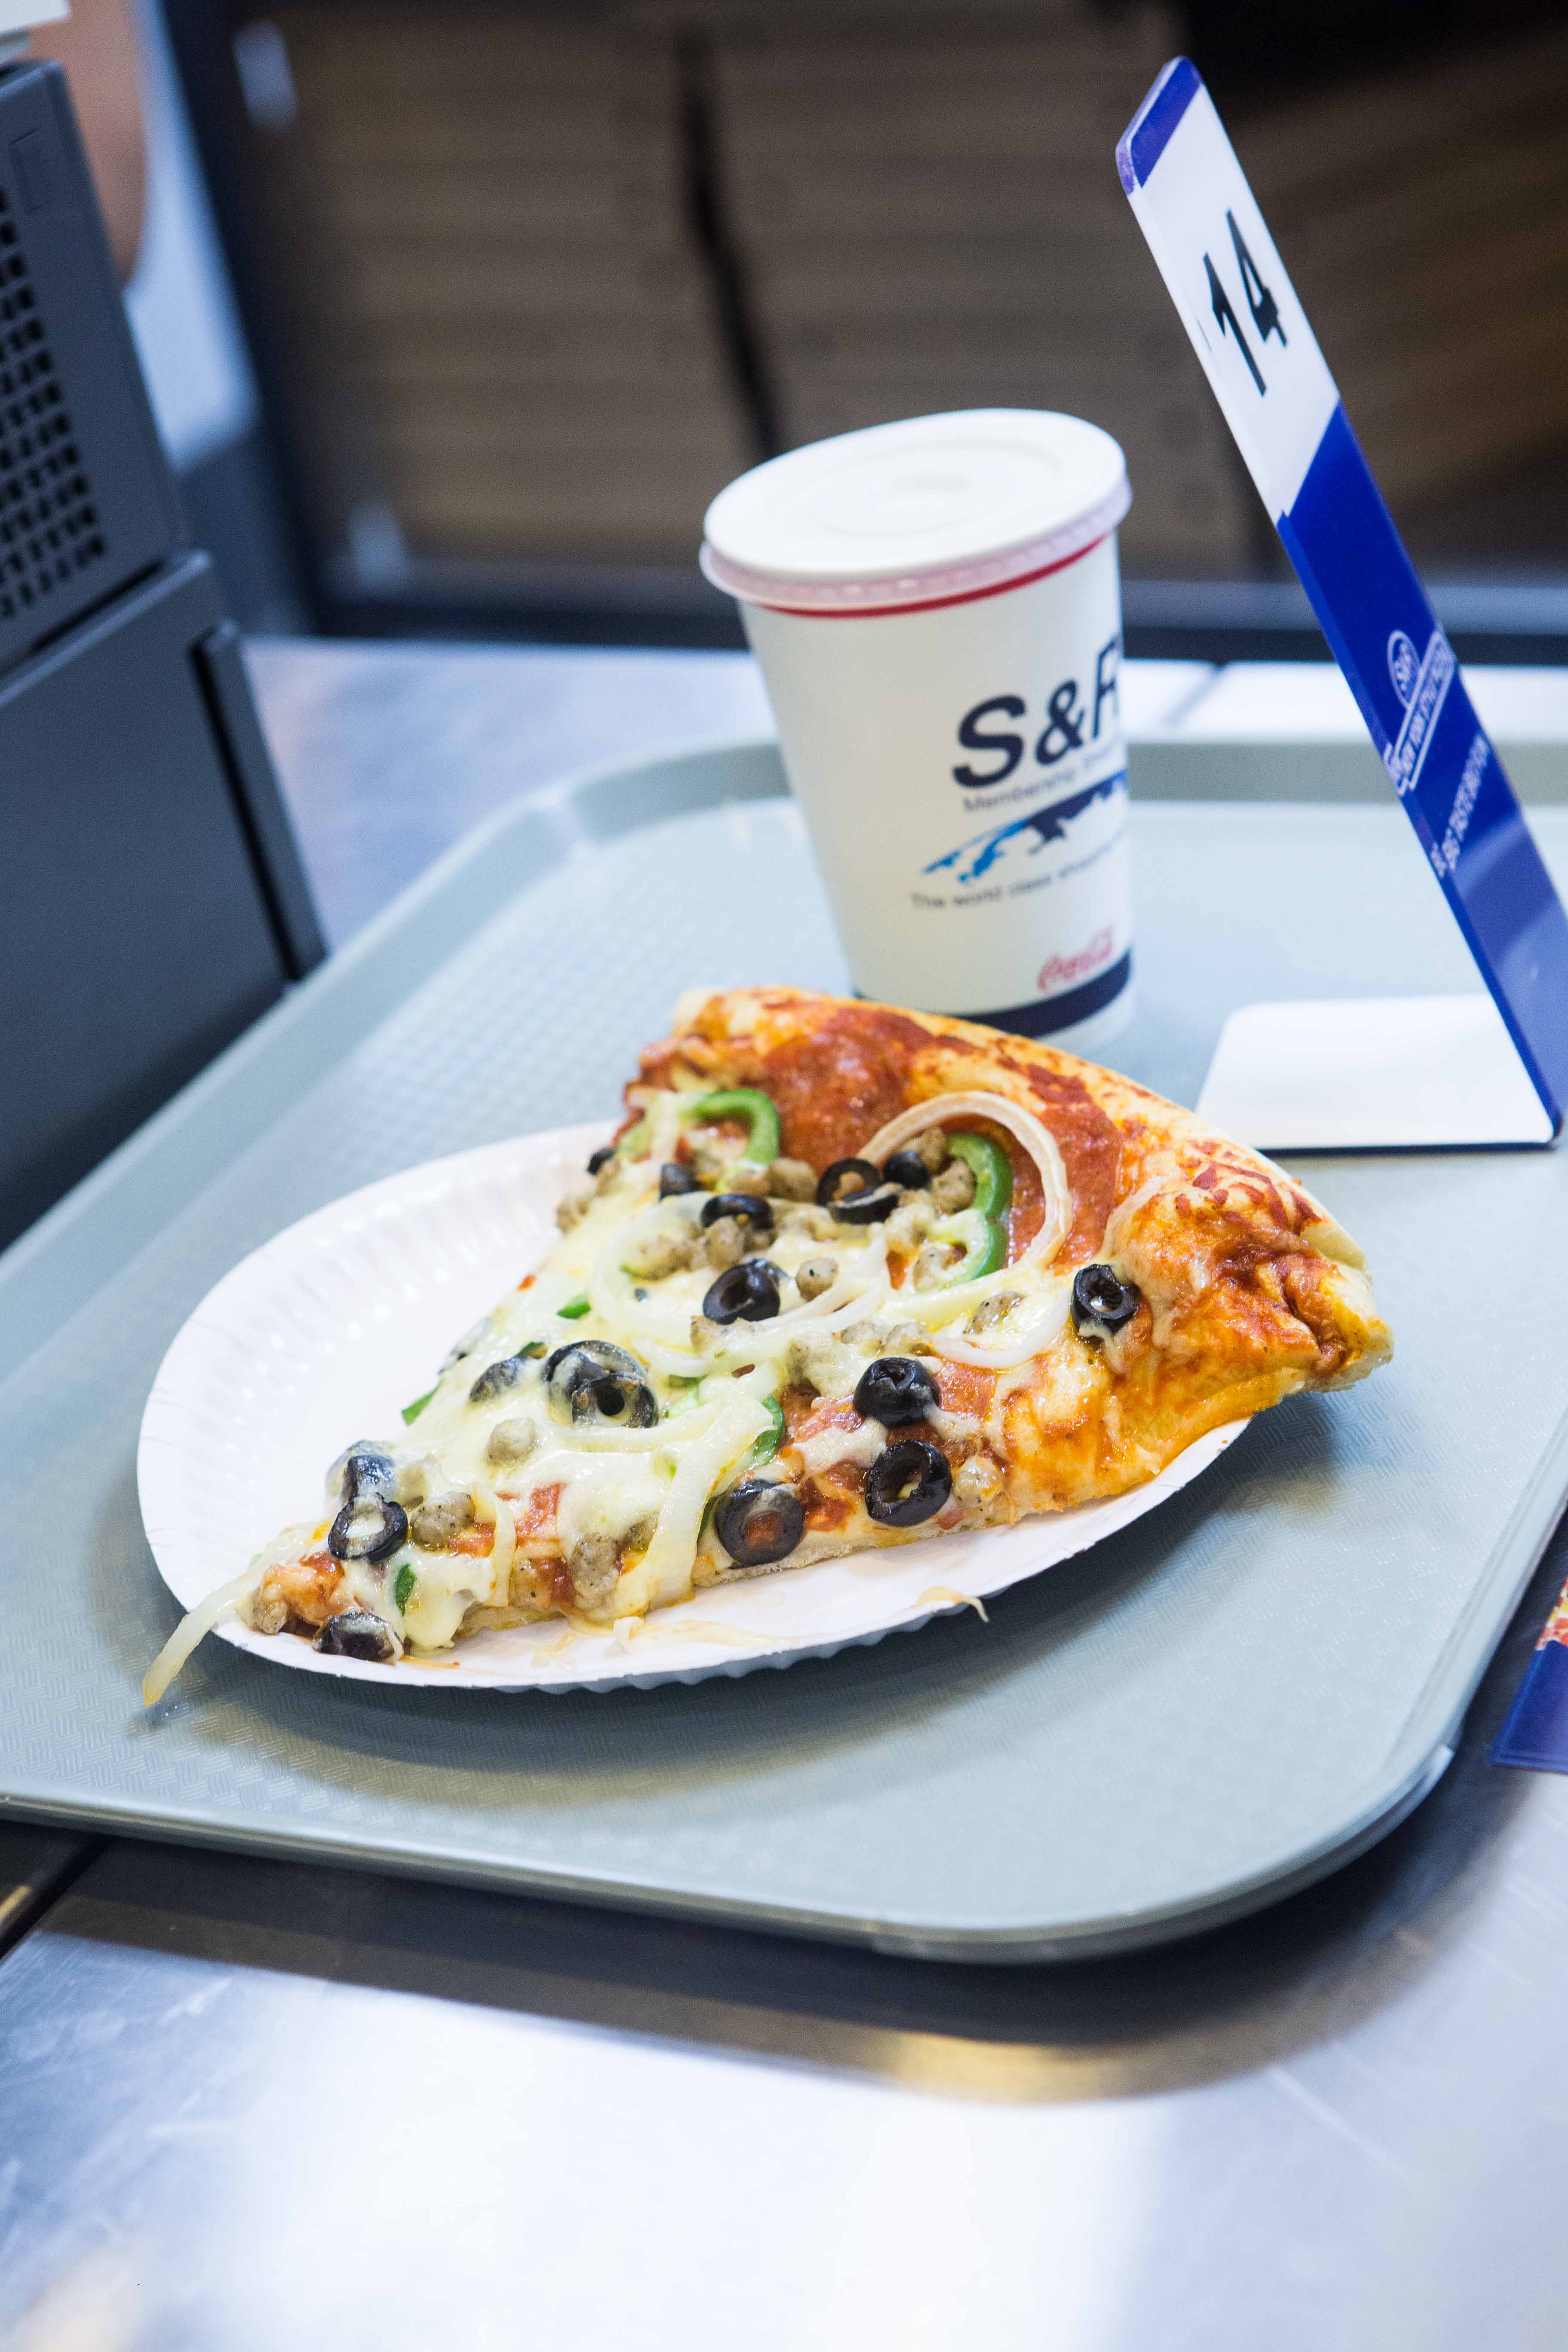 The Combo, which features a generous layer of sauce and cheese, is topped with meat bits, pepperoni, onions, green peppers, and olives. One slice costs P190, while a whole pizza costs P629.